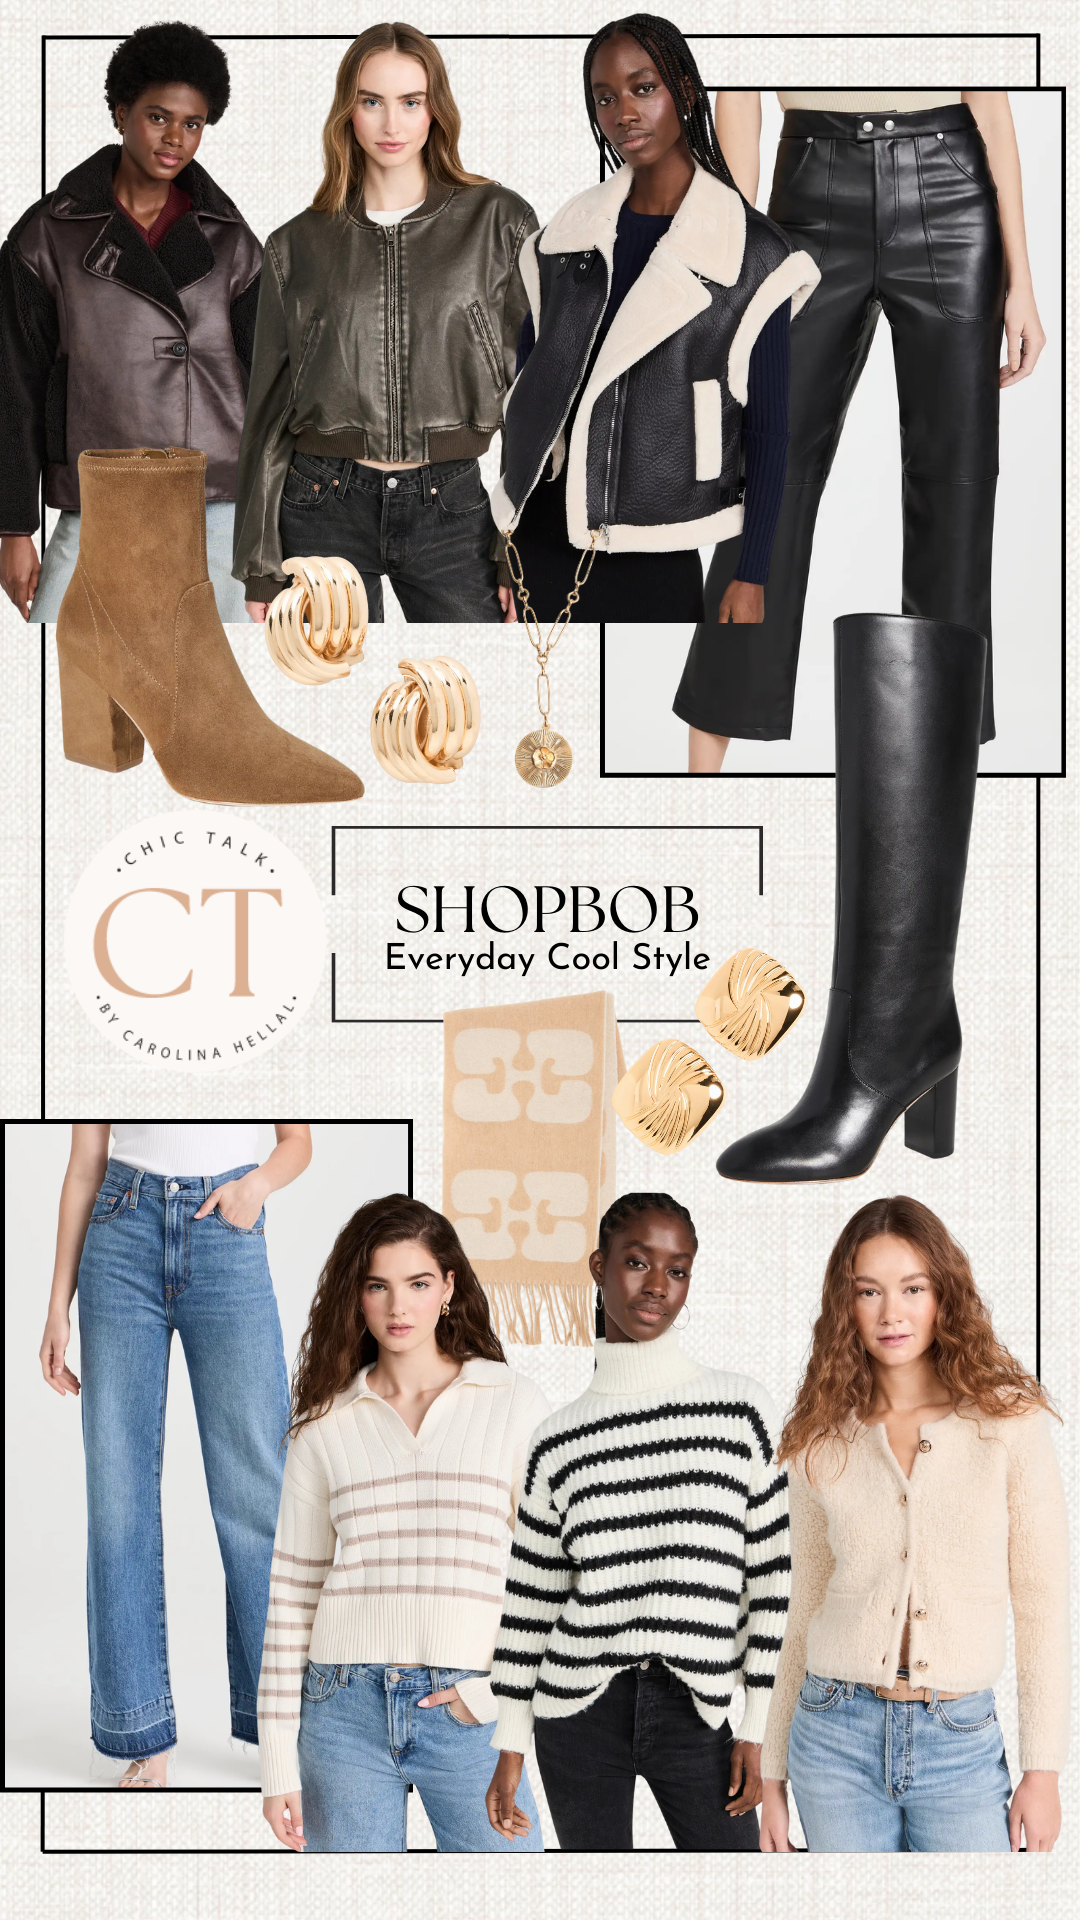 Everyday cool casual style via Shopbop - CHIC TALK